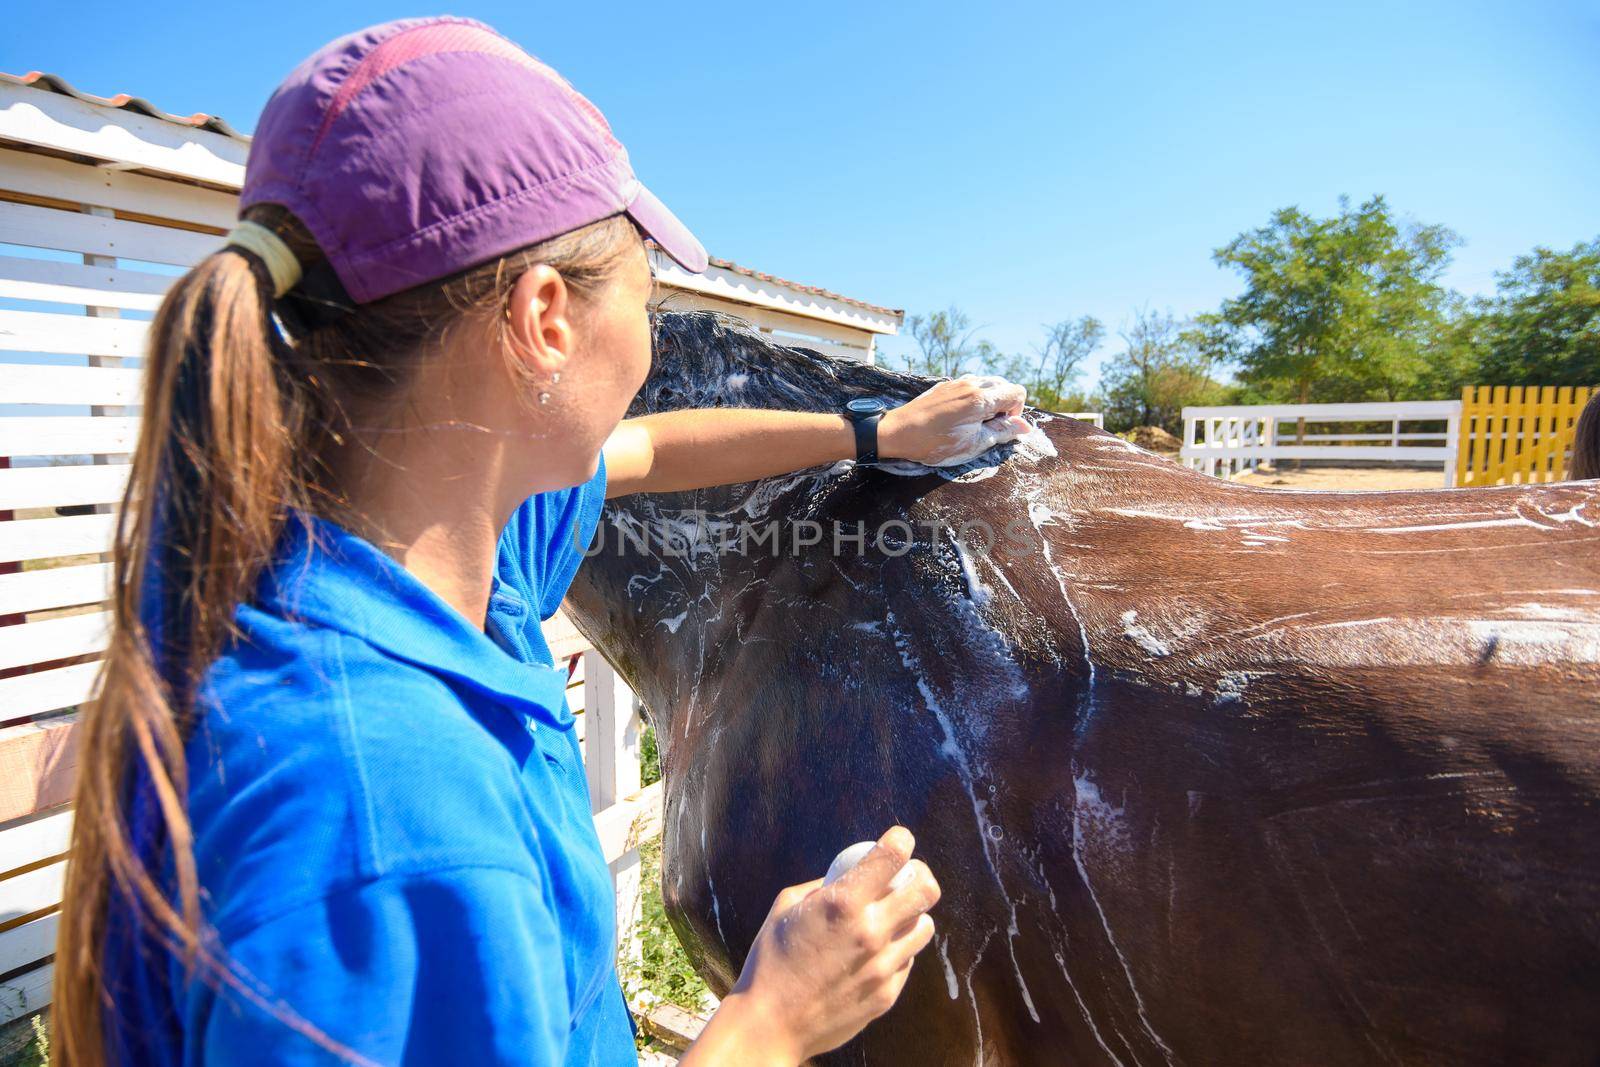 The girl thoroughly washes the horse with a special brush and soap